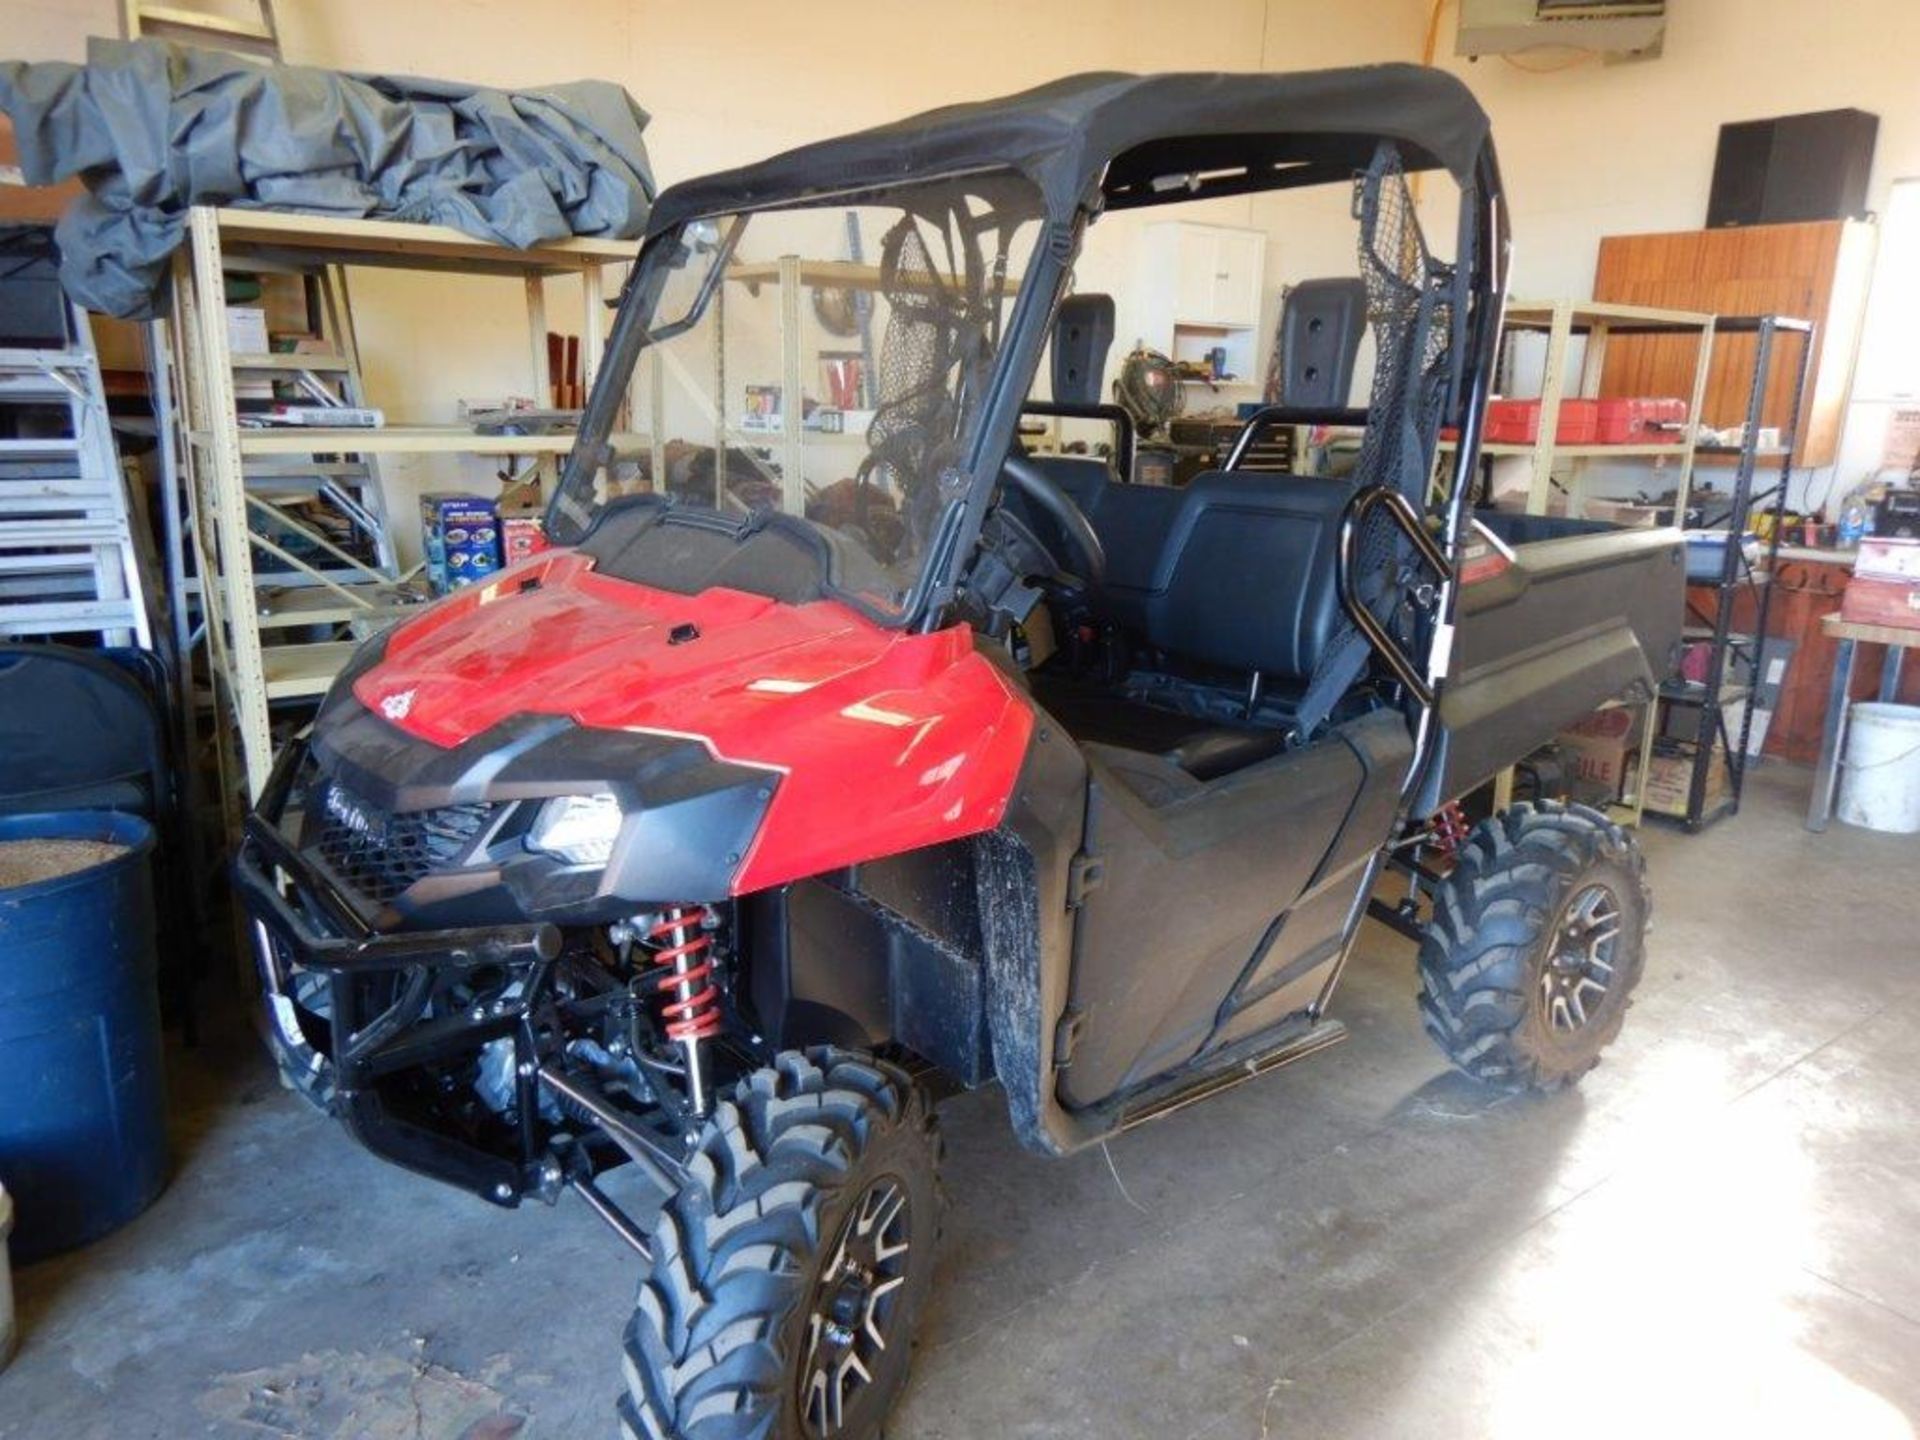 2021 HONDA PIONEER 700 4X4 SIDE-BY-SIDE W/ CARGO BOX, ONLY 97 KM SHOWING - Image 3 of 4